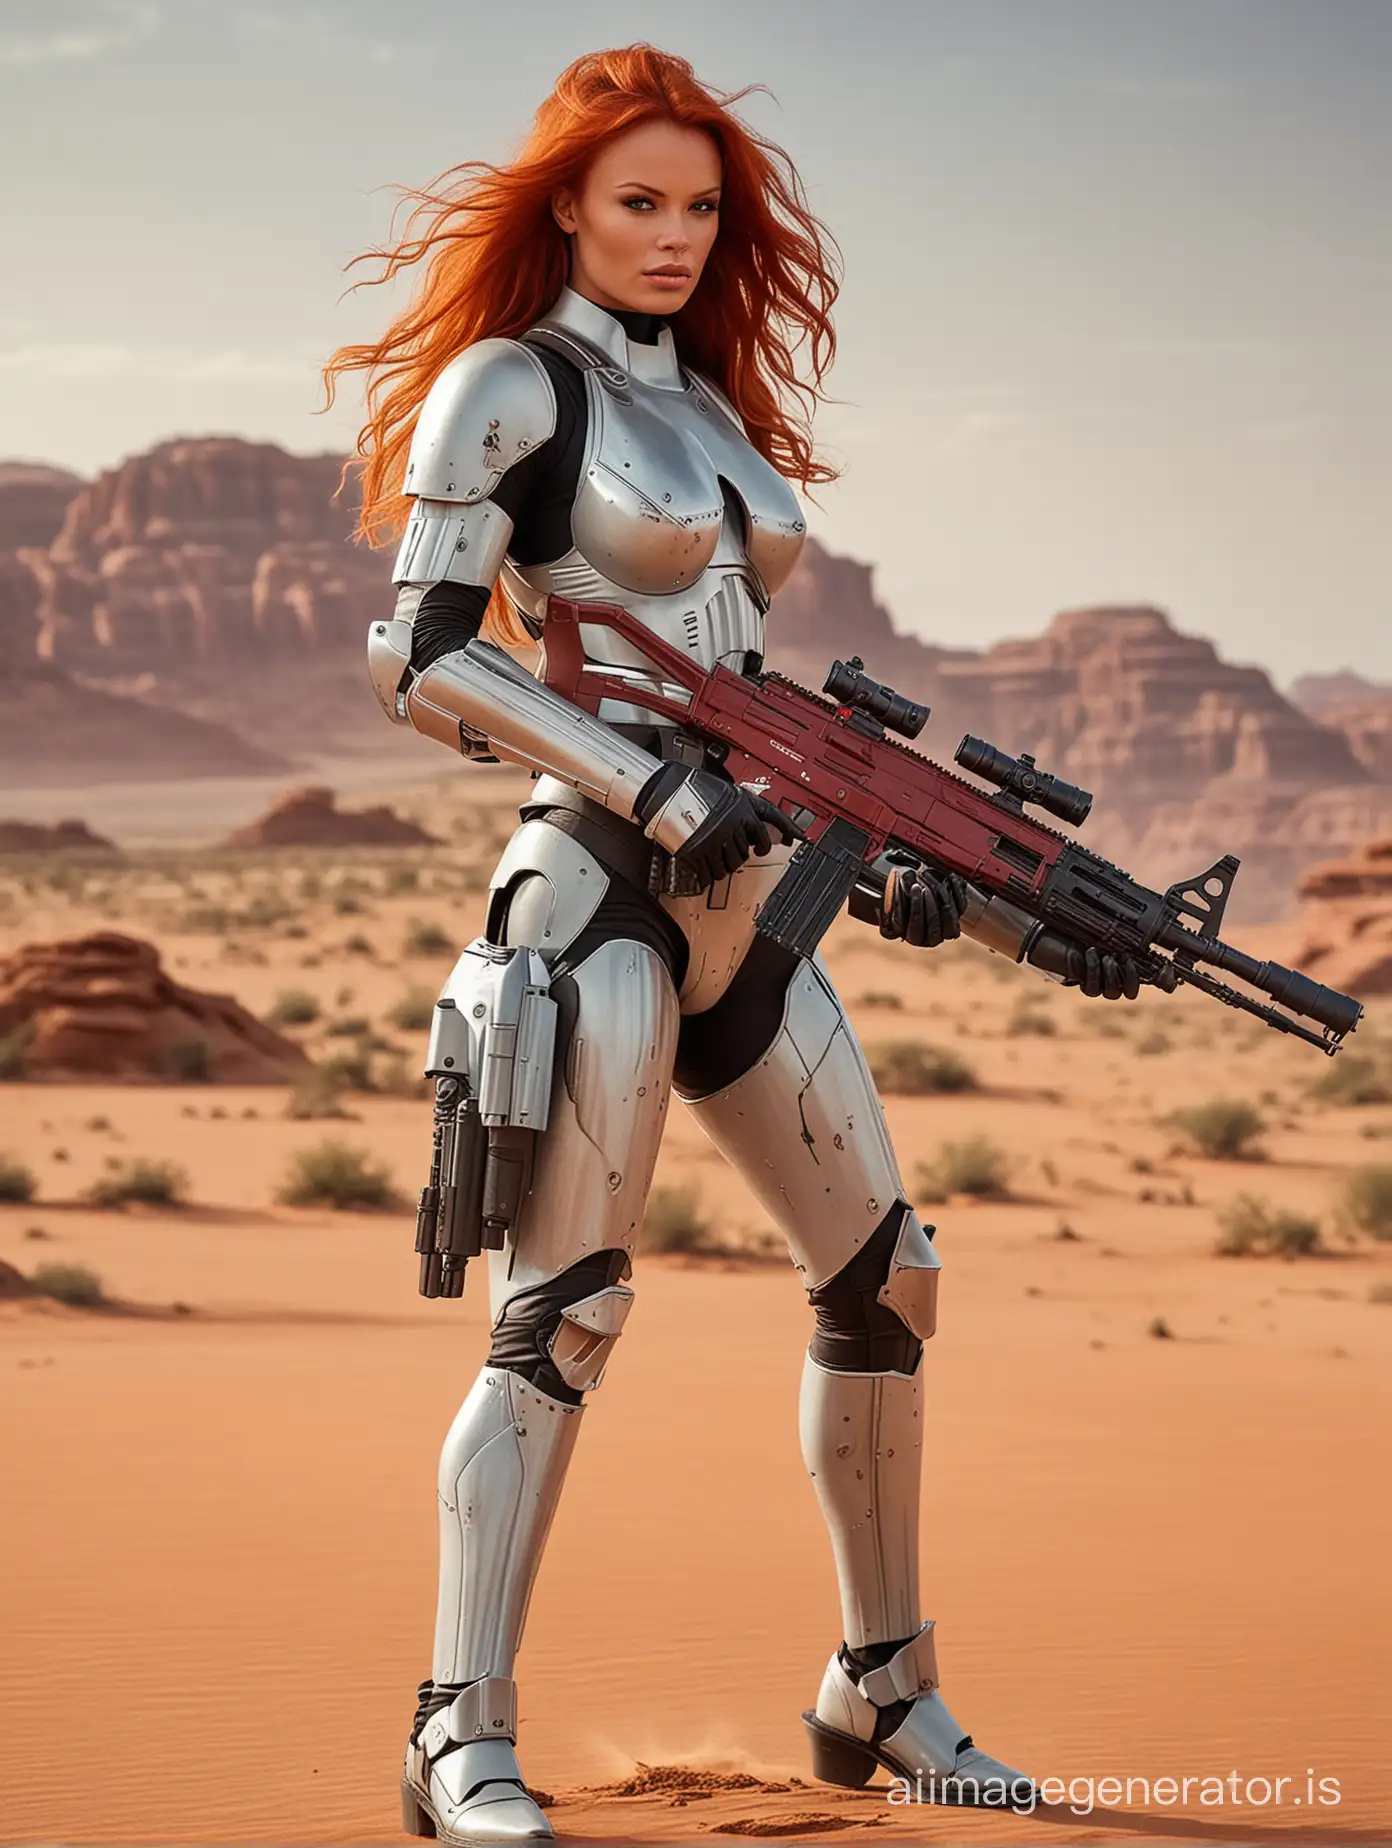 Young Pamela Anderson. Full body sexy woman riding a monster. Very long red hair. Full stormtrooper armor and laser rifle. Star Wars desert background with Mandalorian and Yoda